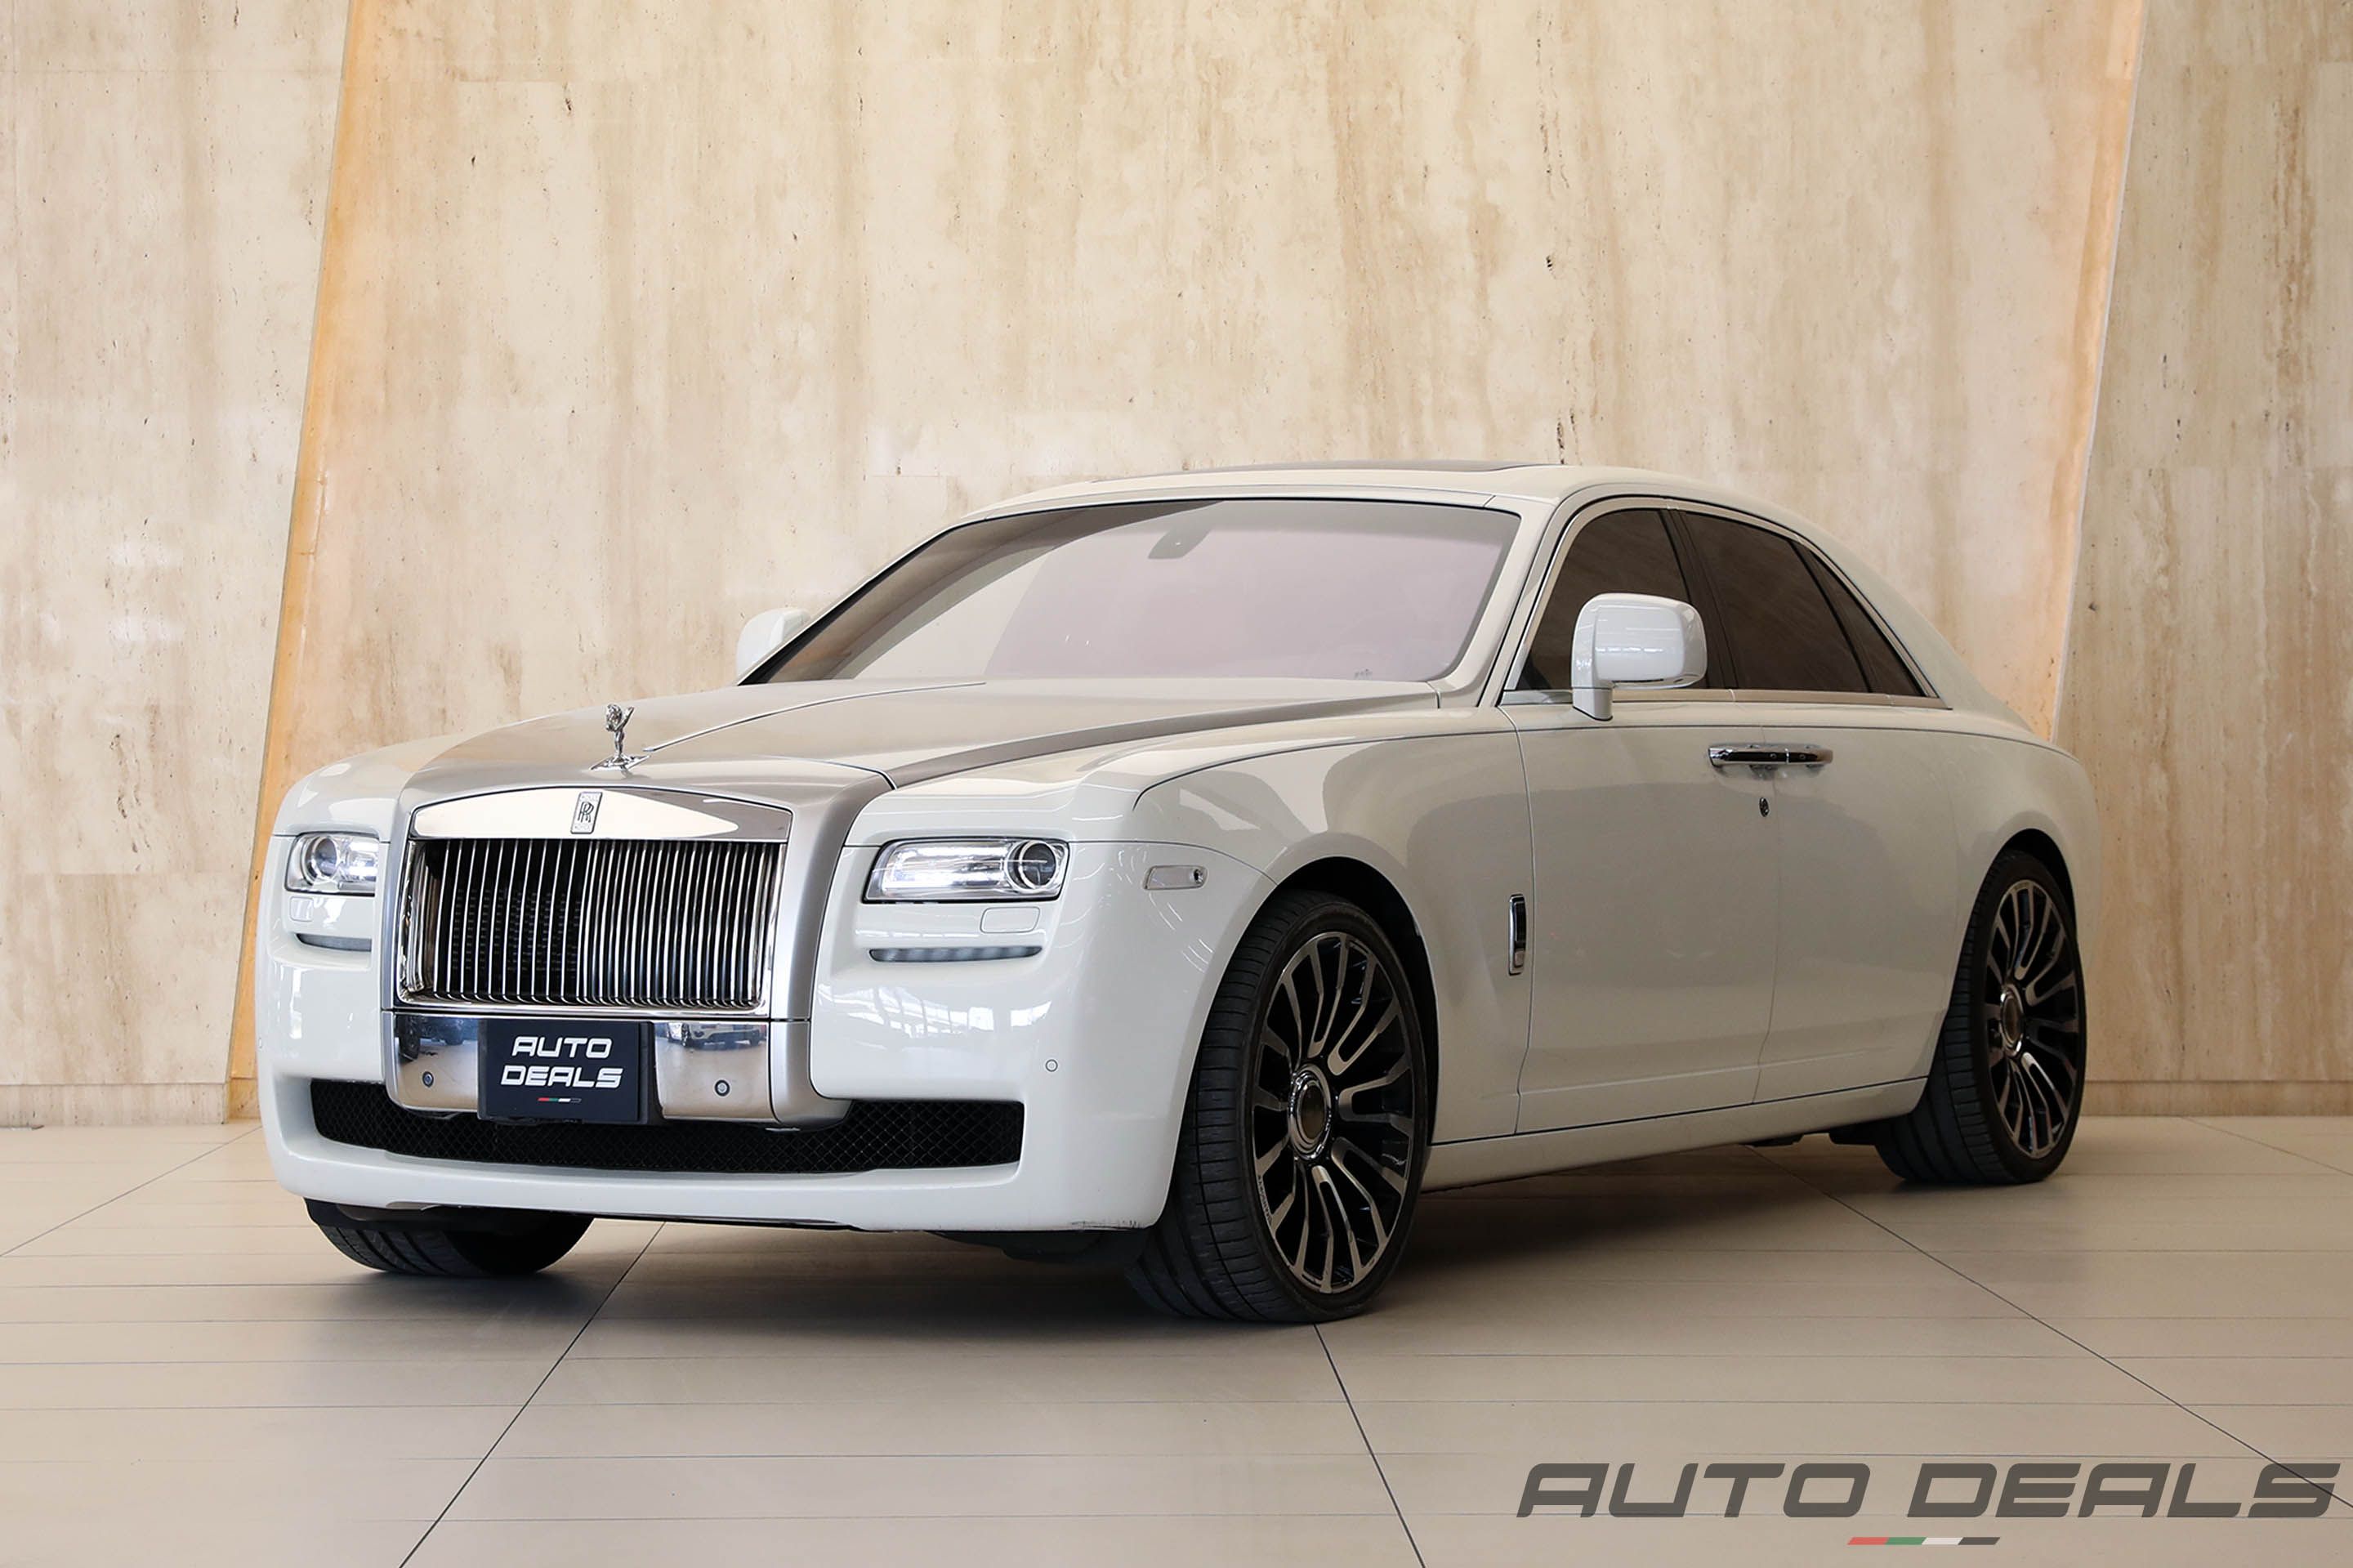 Rolls Royce Ghost | 2011 - Well Maintained - Premium Quality - Excellent Condition | 6.6L V12